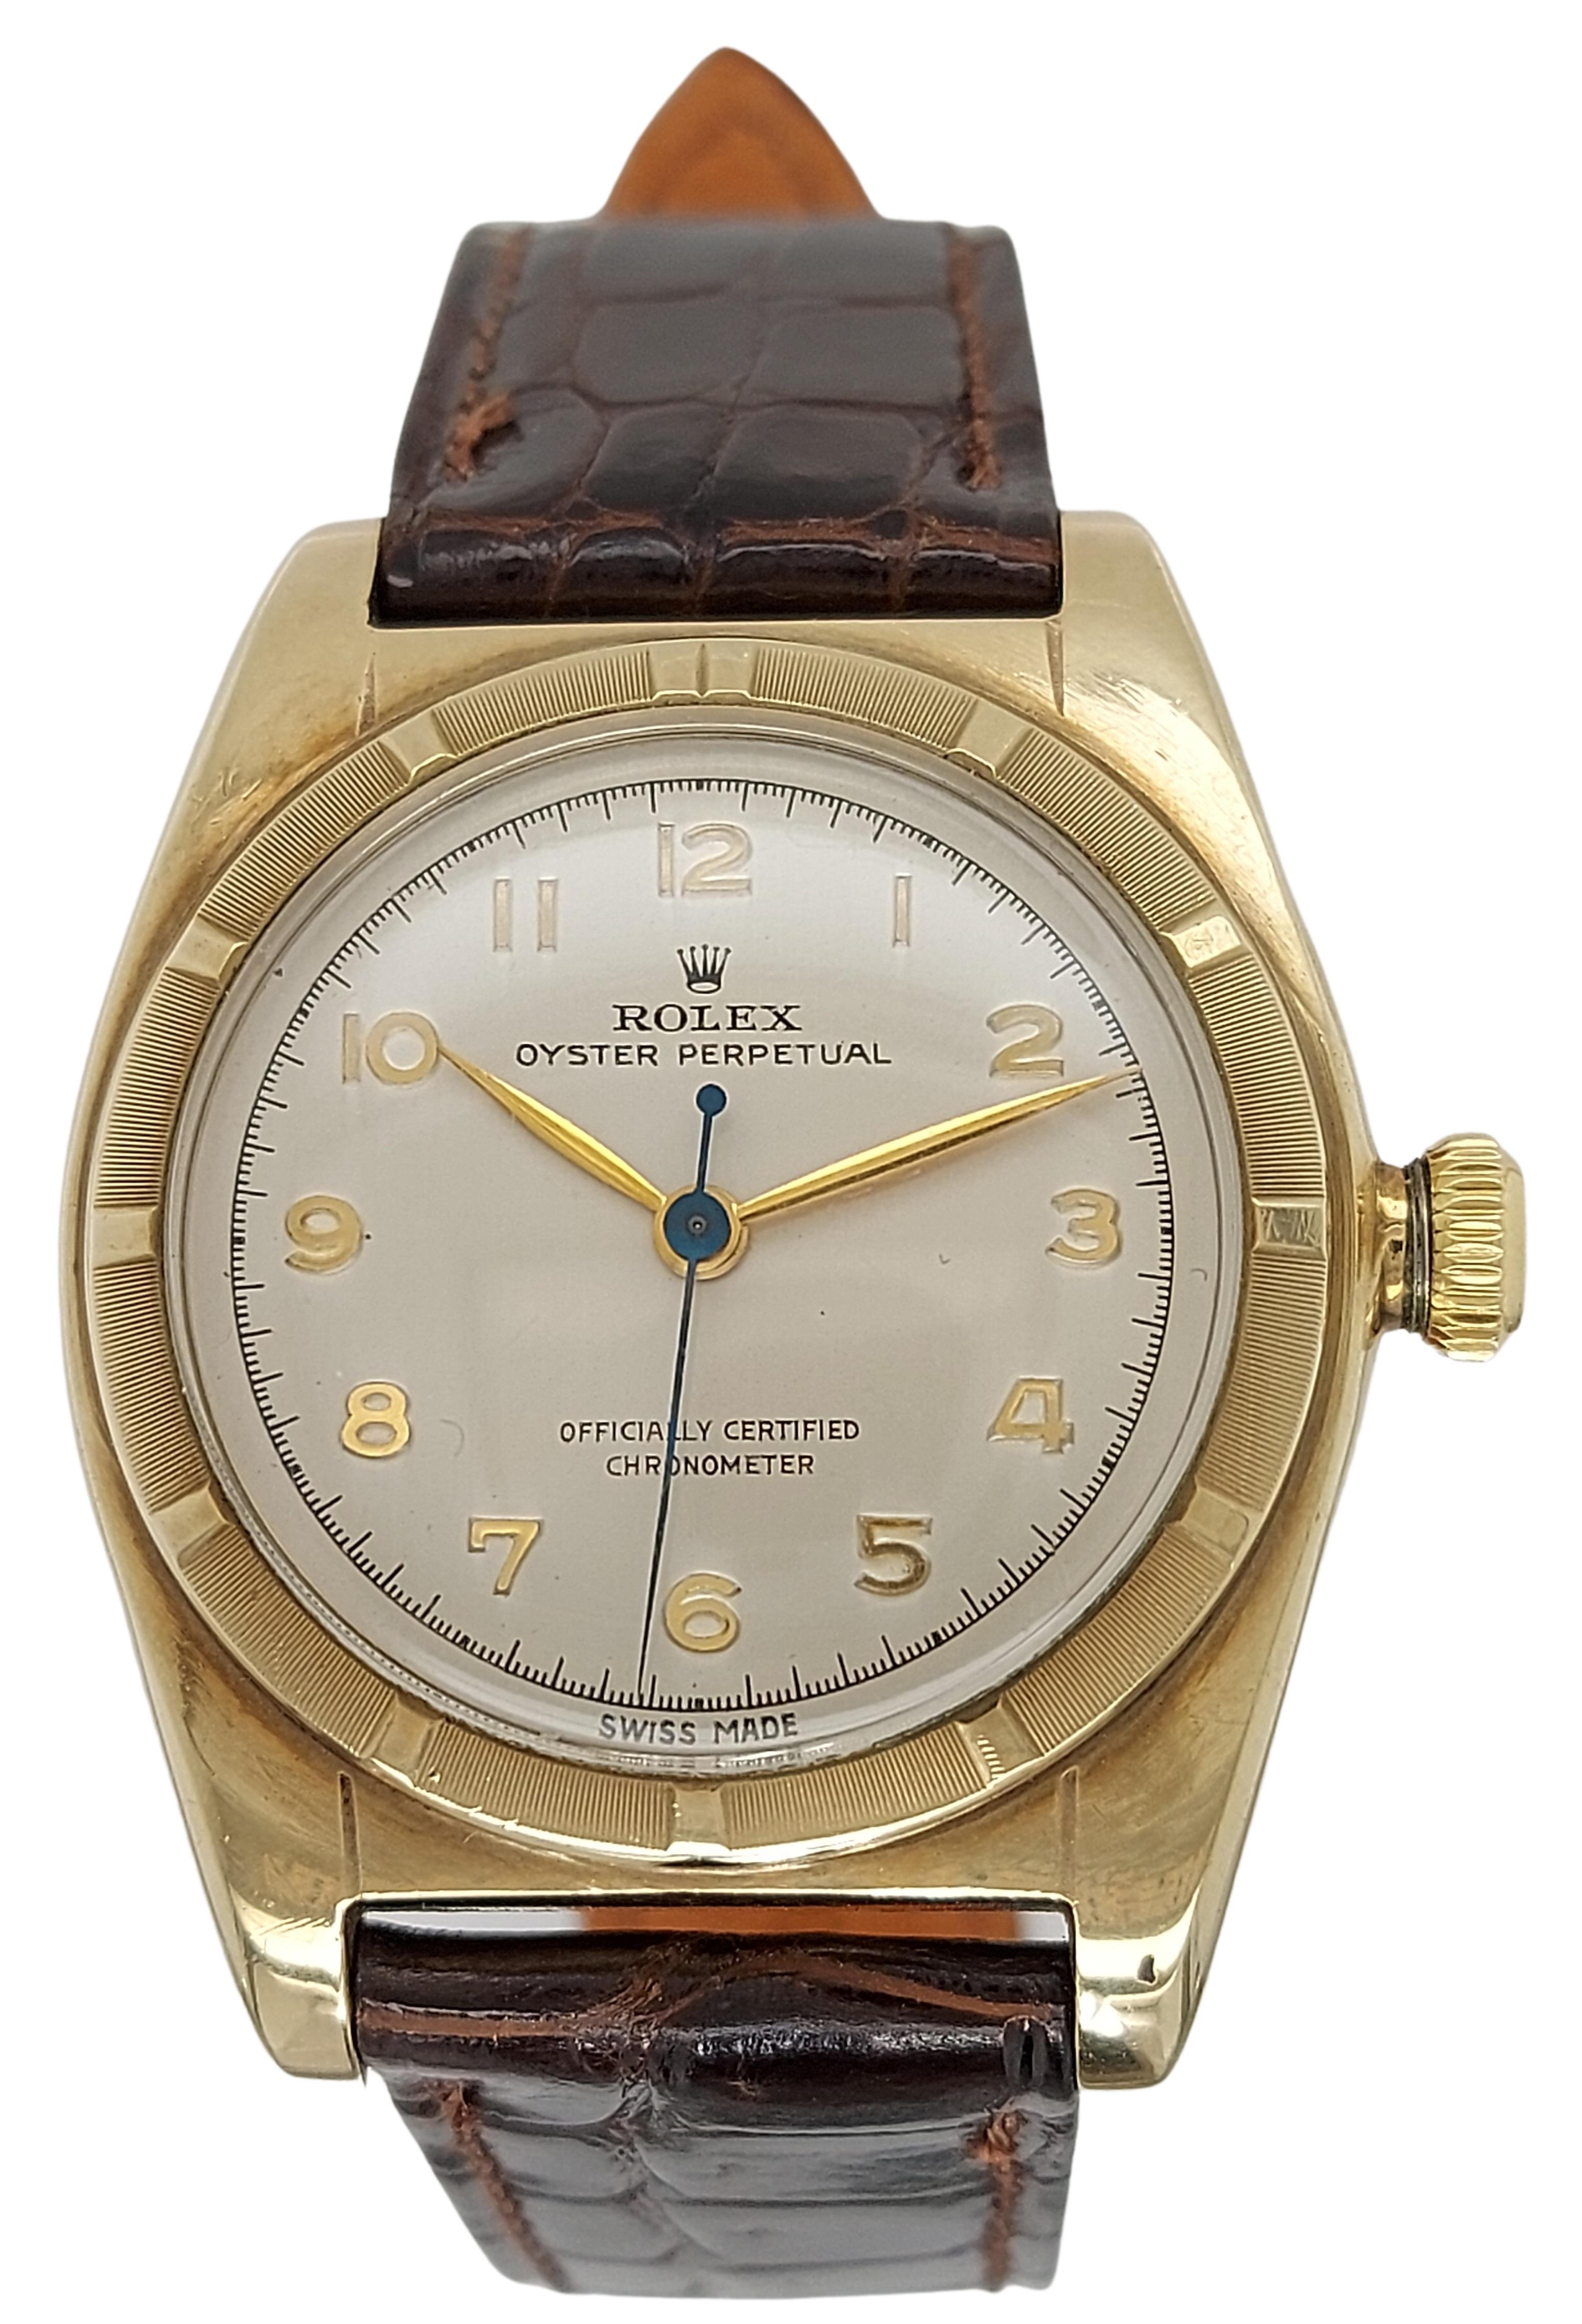 Rolex Oyster Perpetual Bubble Back Reference 5011, Automatic

Reference: 5011

Movement: Automatic

Functions: Hours, Minutes, Seconds

Case: 33mm Stainless Steel & Gold plated

Dial: Champagne/Silver dial with applied yellow gold arabic numerals